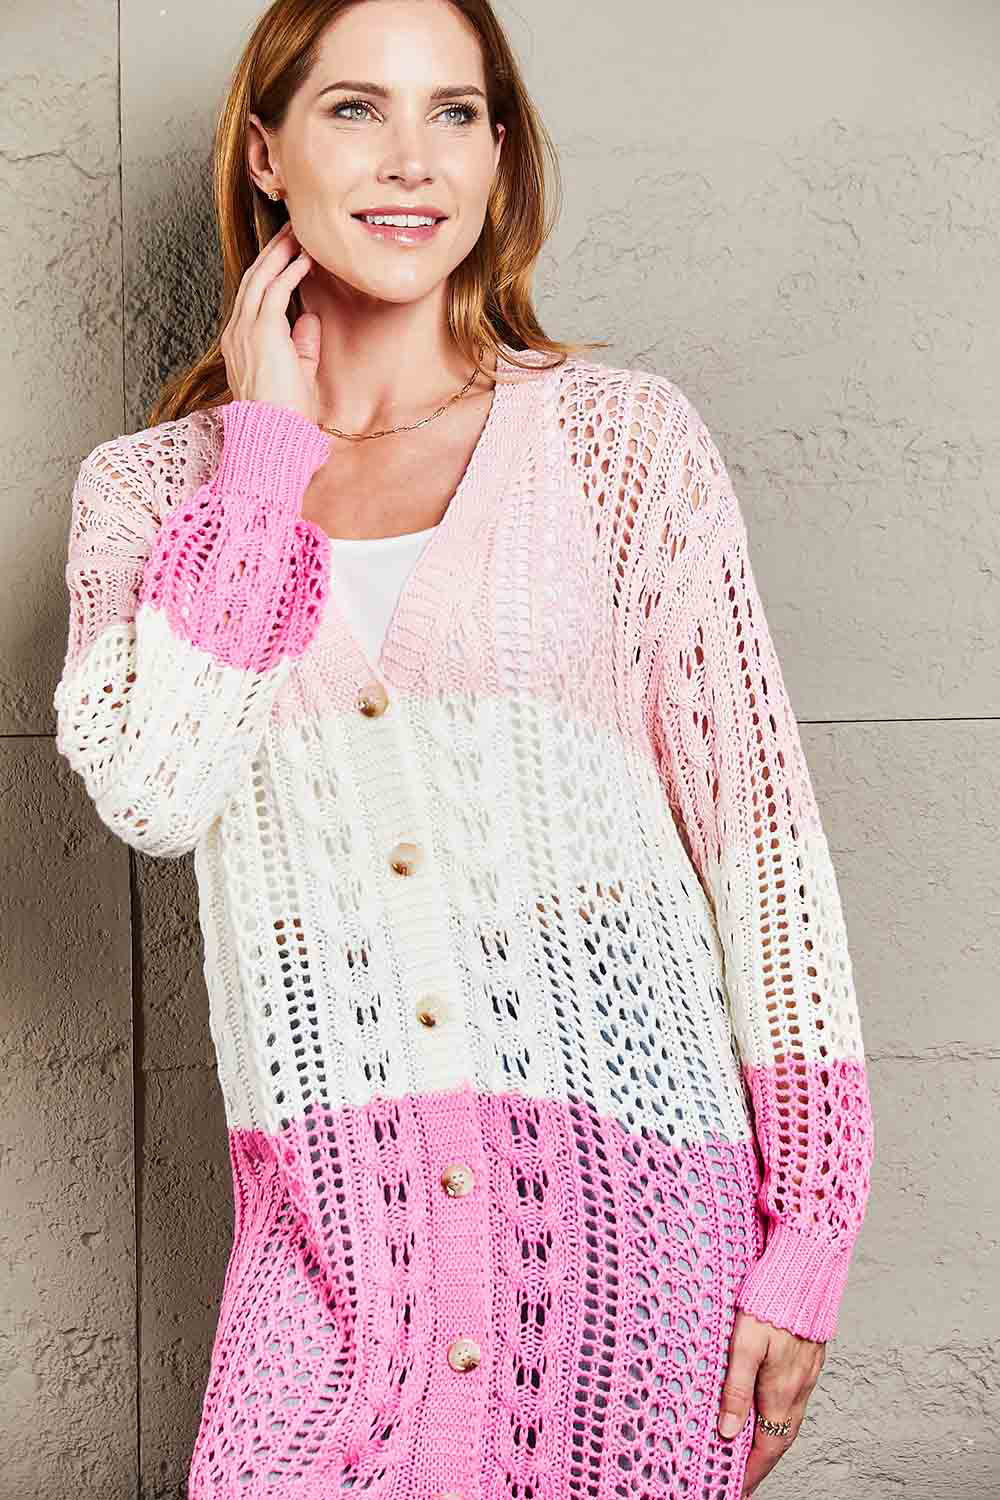 Openwork Ribbed Cuff Longline Cardigan - Women’s Clothing & Accessories - Shirts & Tops - 3 - 2024